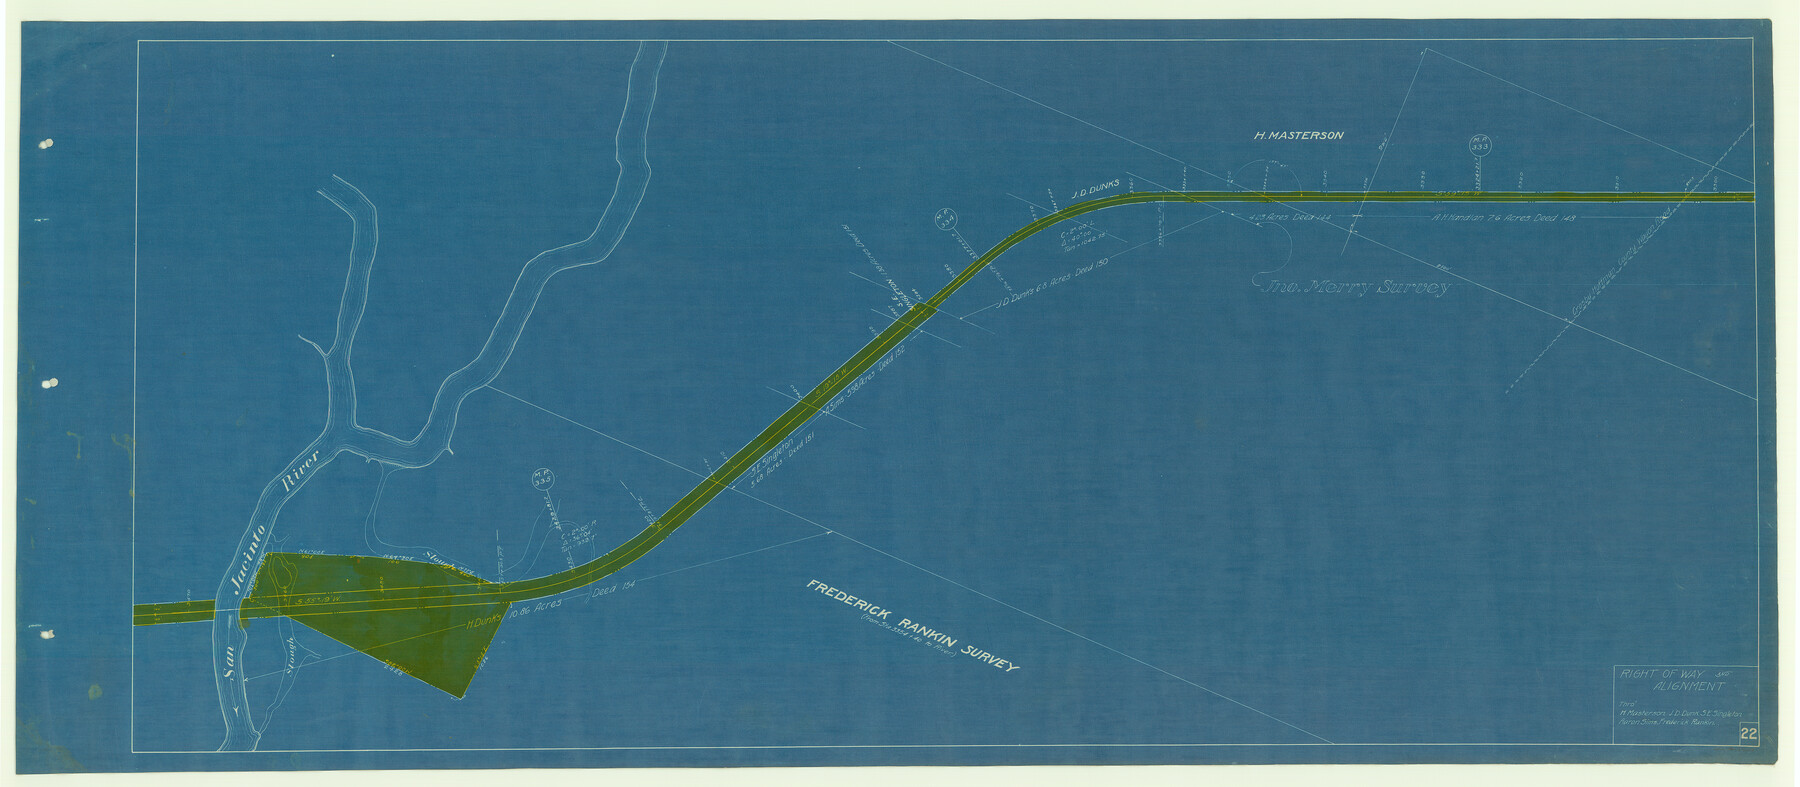 64127, [Beaumont, Sour Lake and Western Ry. Right of Way and Alignment - Frisco], General Map Collection